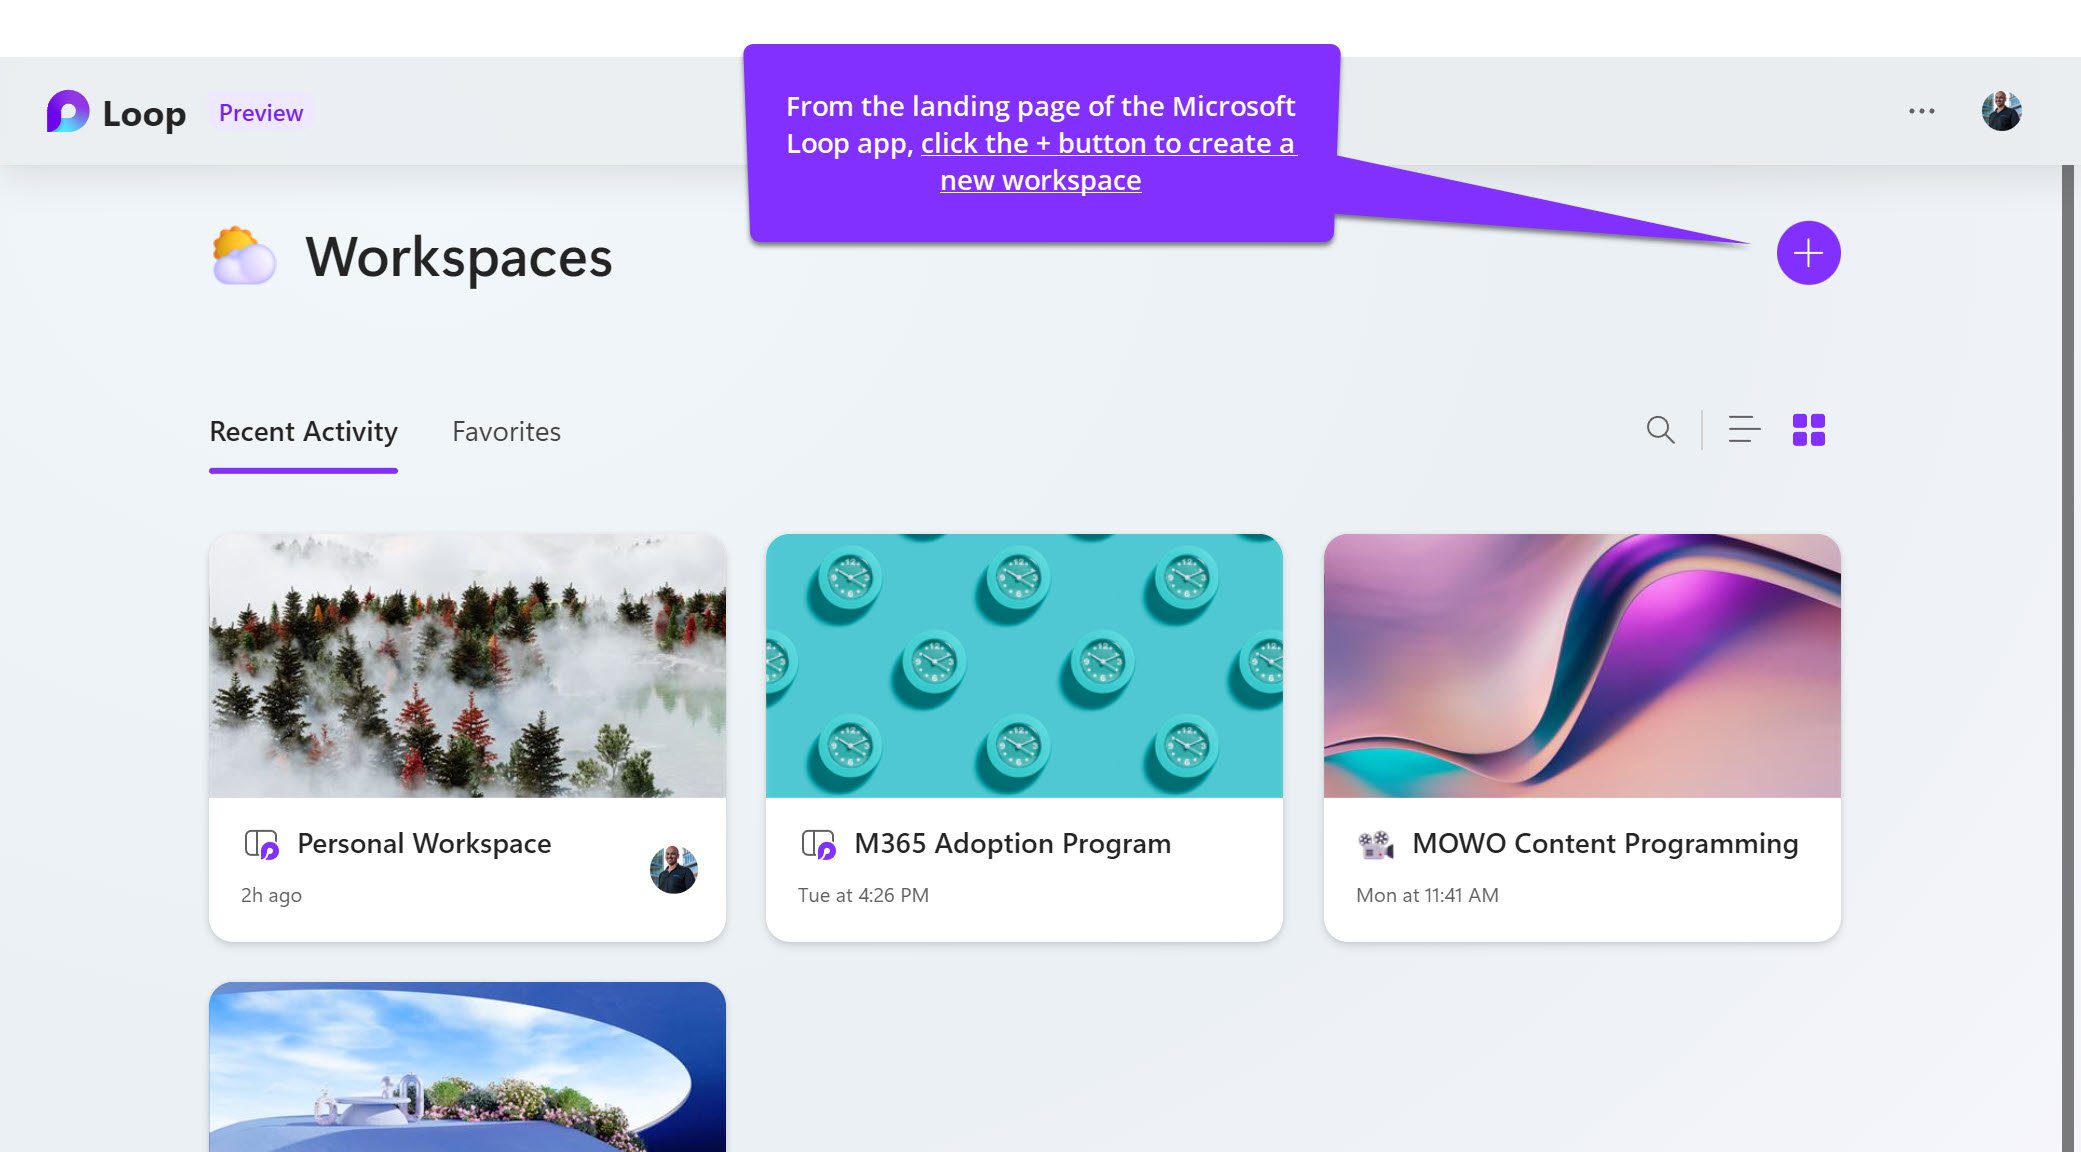 From the landing page of the Microsoft Loop app, click the "+" button to create a new workspace